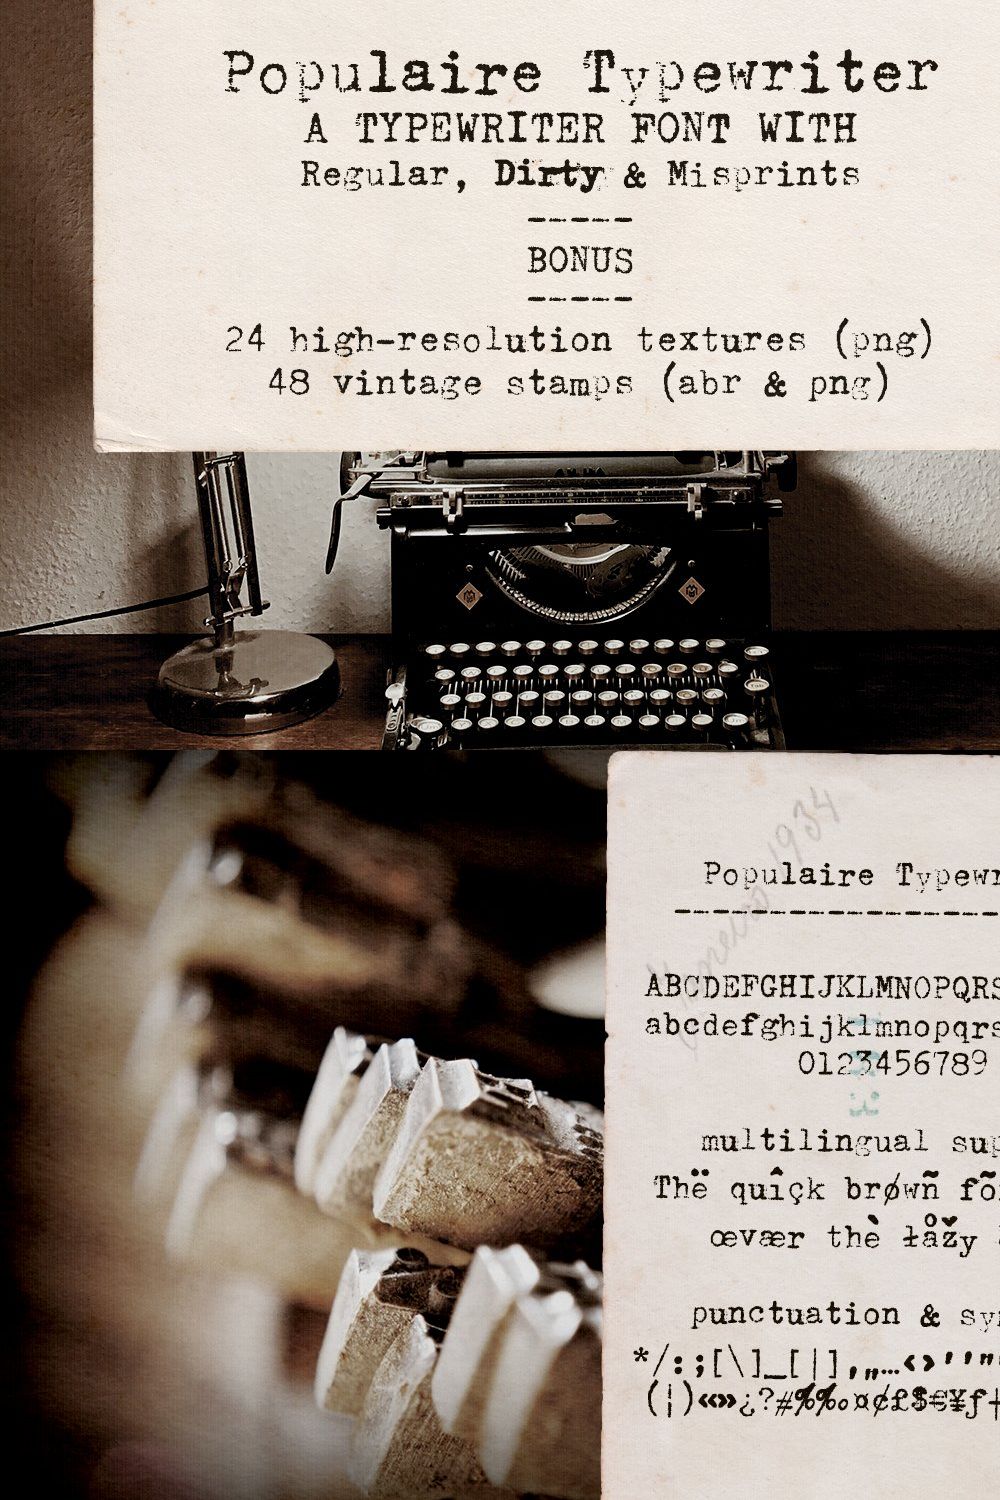 Populaire Typewriter Font & Extras pinterest preview image.